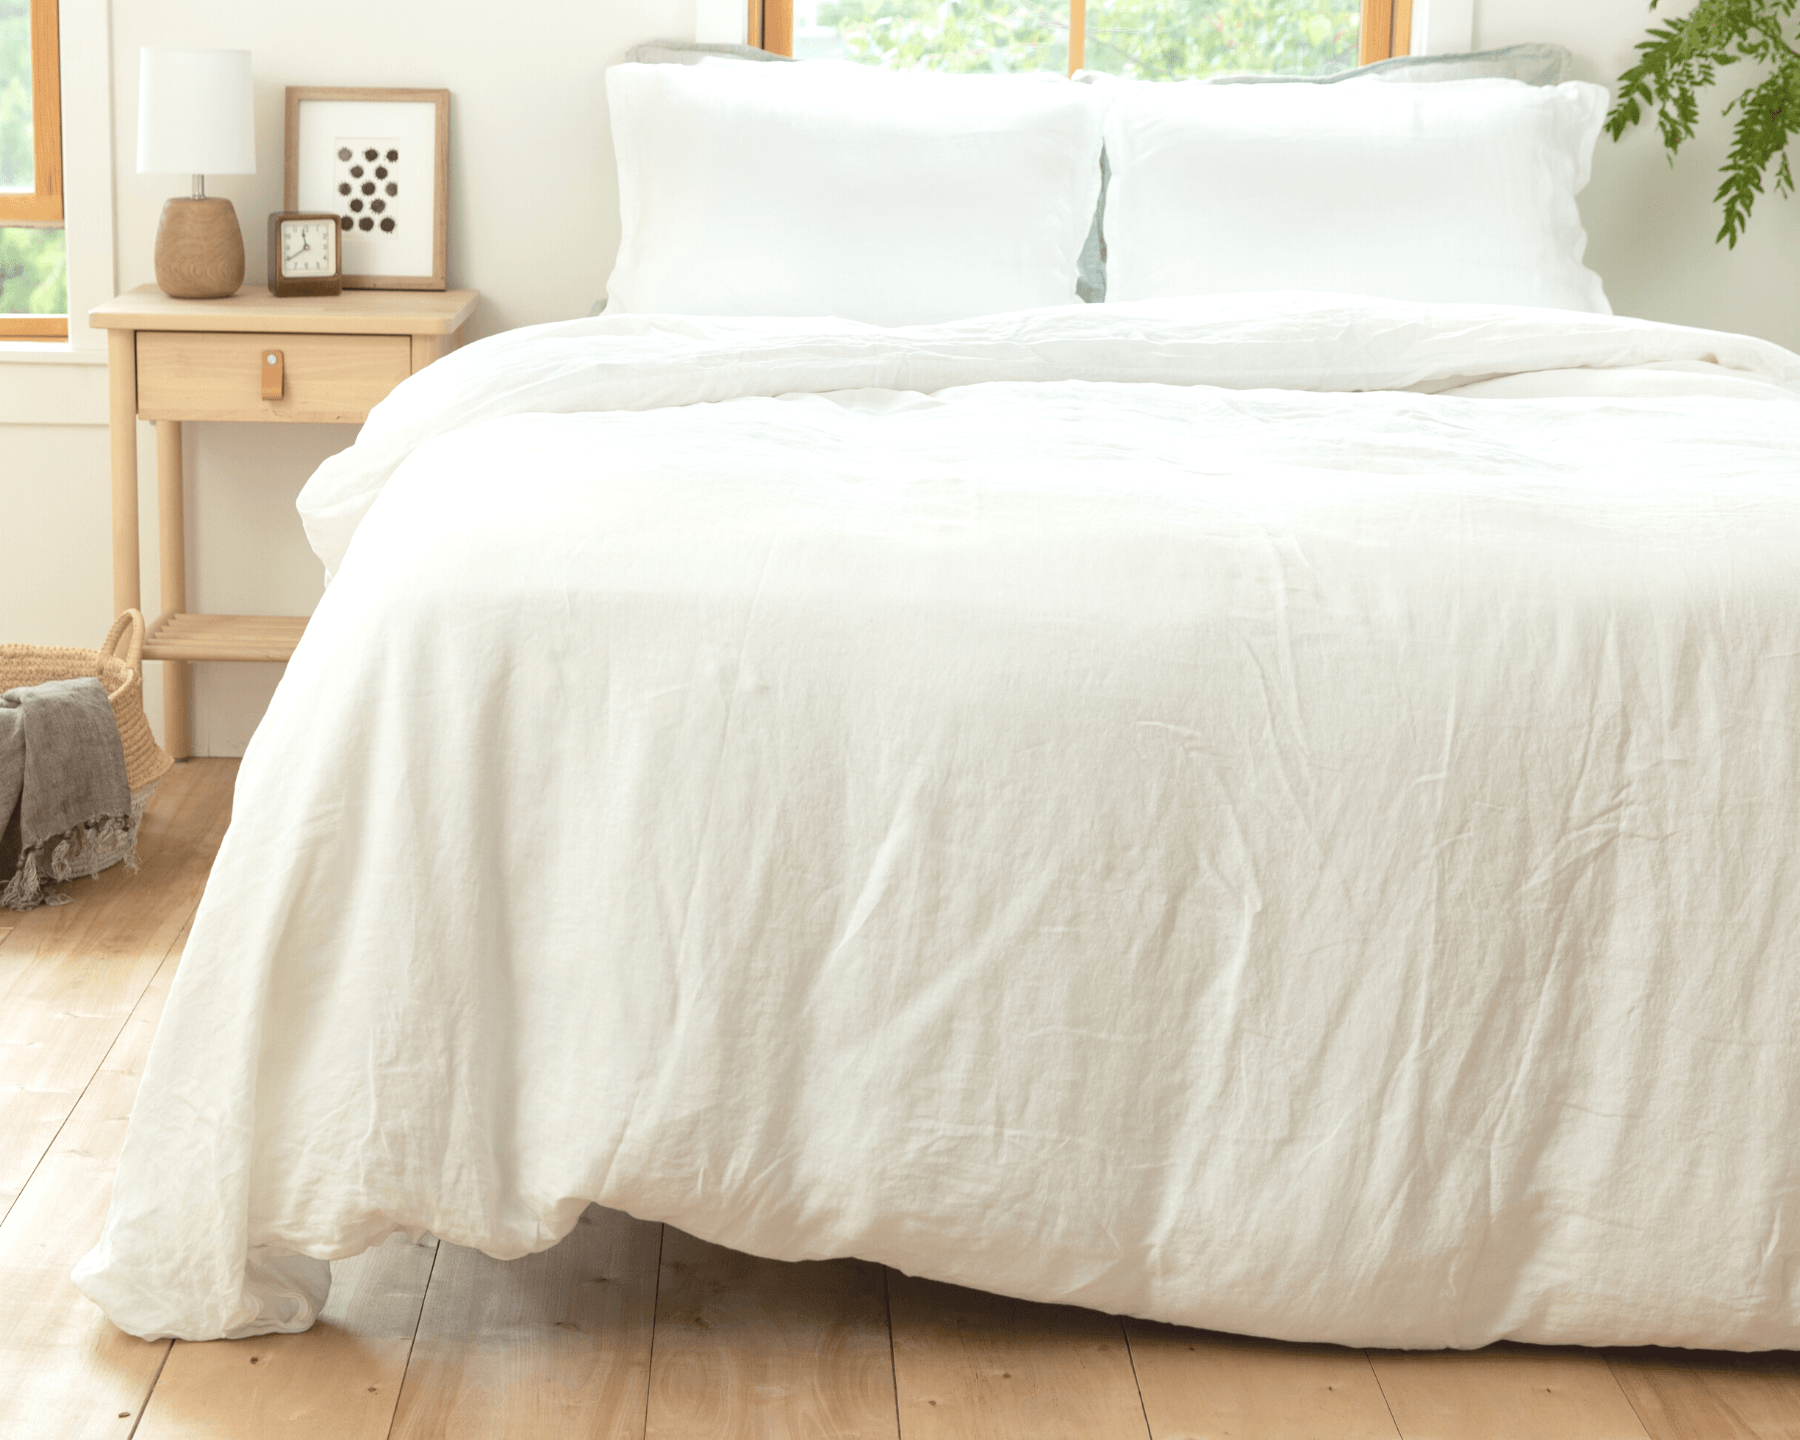 White organic European linen duvet covers set with two matching pillowcases